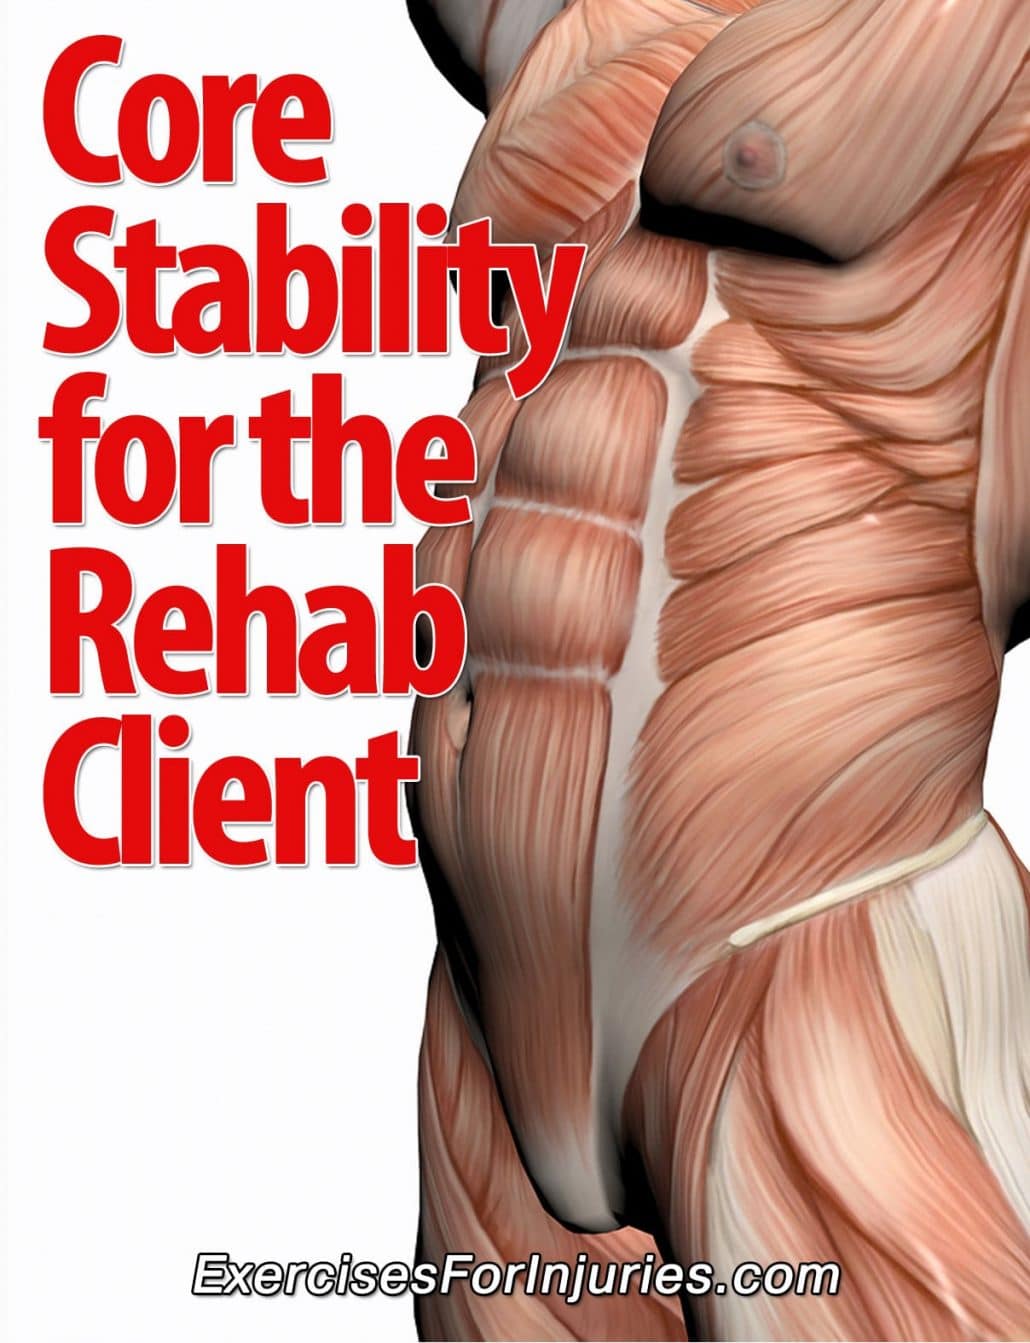 Core Stability of the Rehab Client